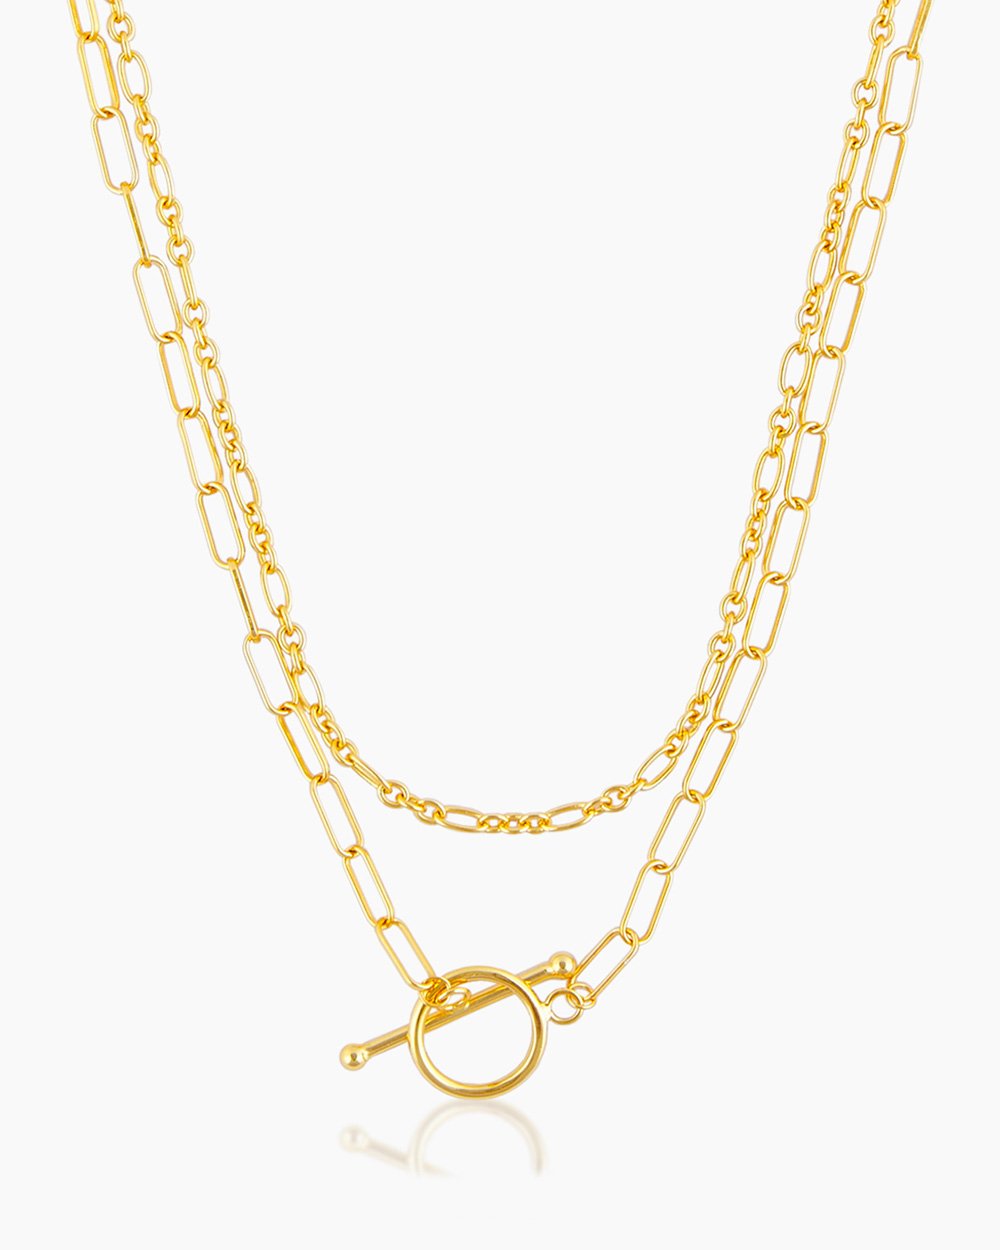 Venice Gold Necklace - Penny Pairs